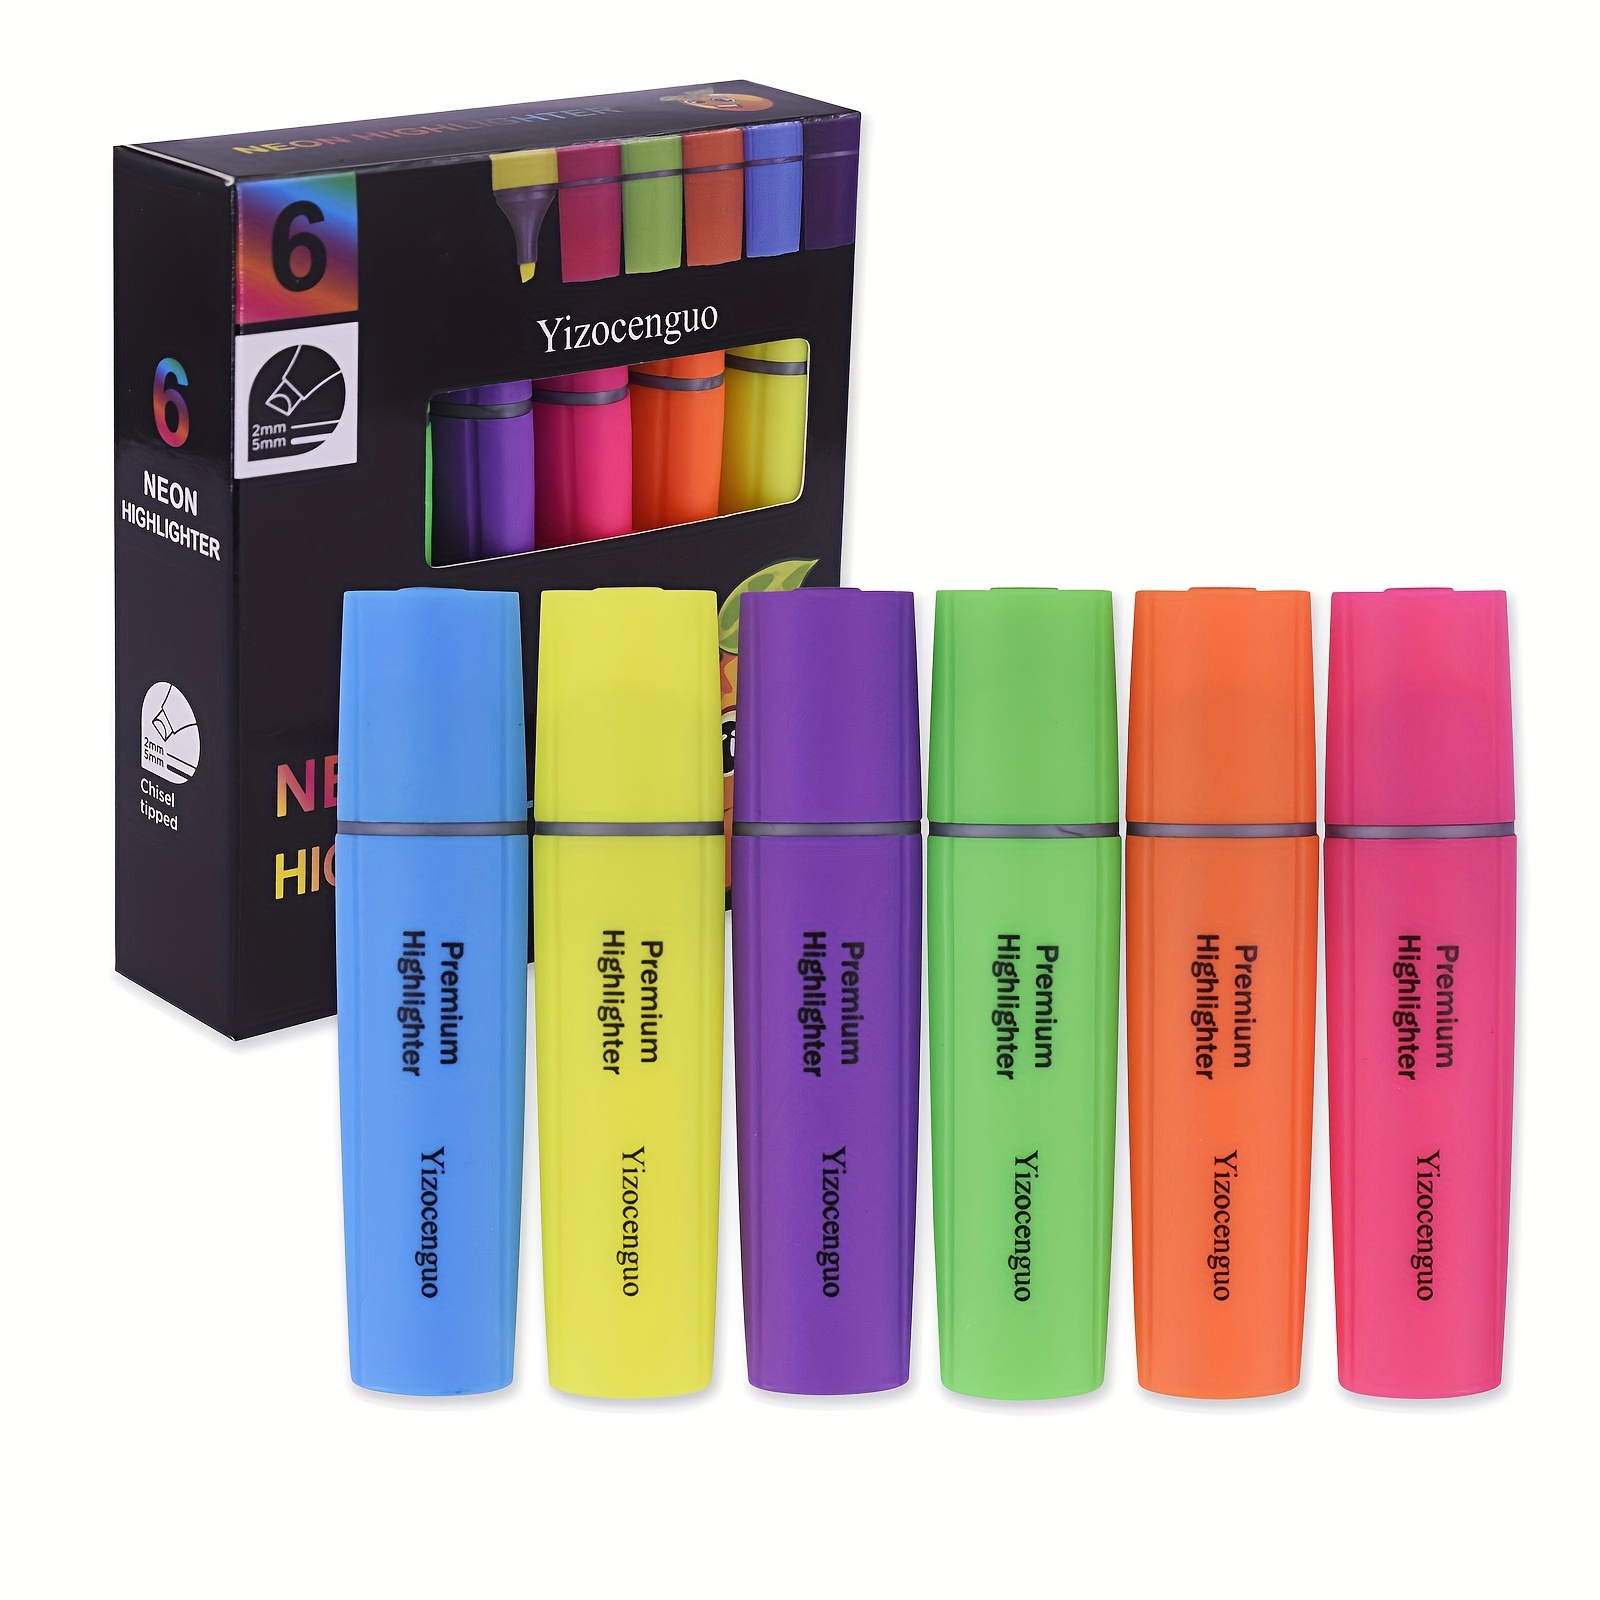 J.Burrows Whiteboard Markers Chisel Pastel 6 Pack